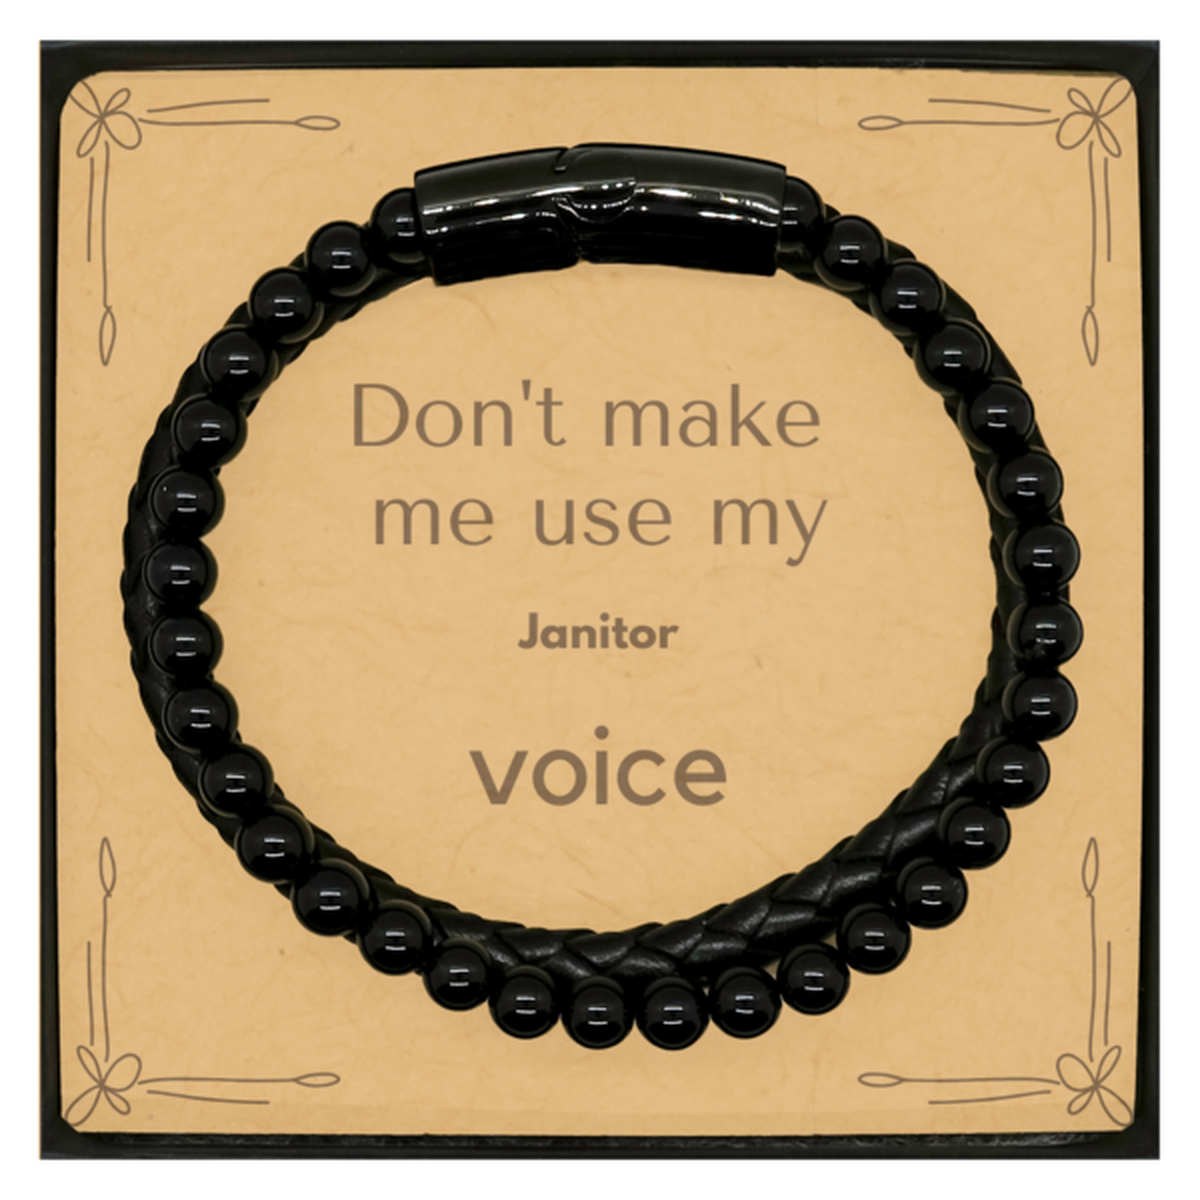 Don't make me use my Janitor voice, Sarcasm Janitor Card Gifts, Christmas Janitor Stone Leather Bracelets Birthday Unique Gifts For Janitor Coworkers, Men, Women, Colleague, Friends